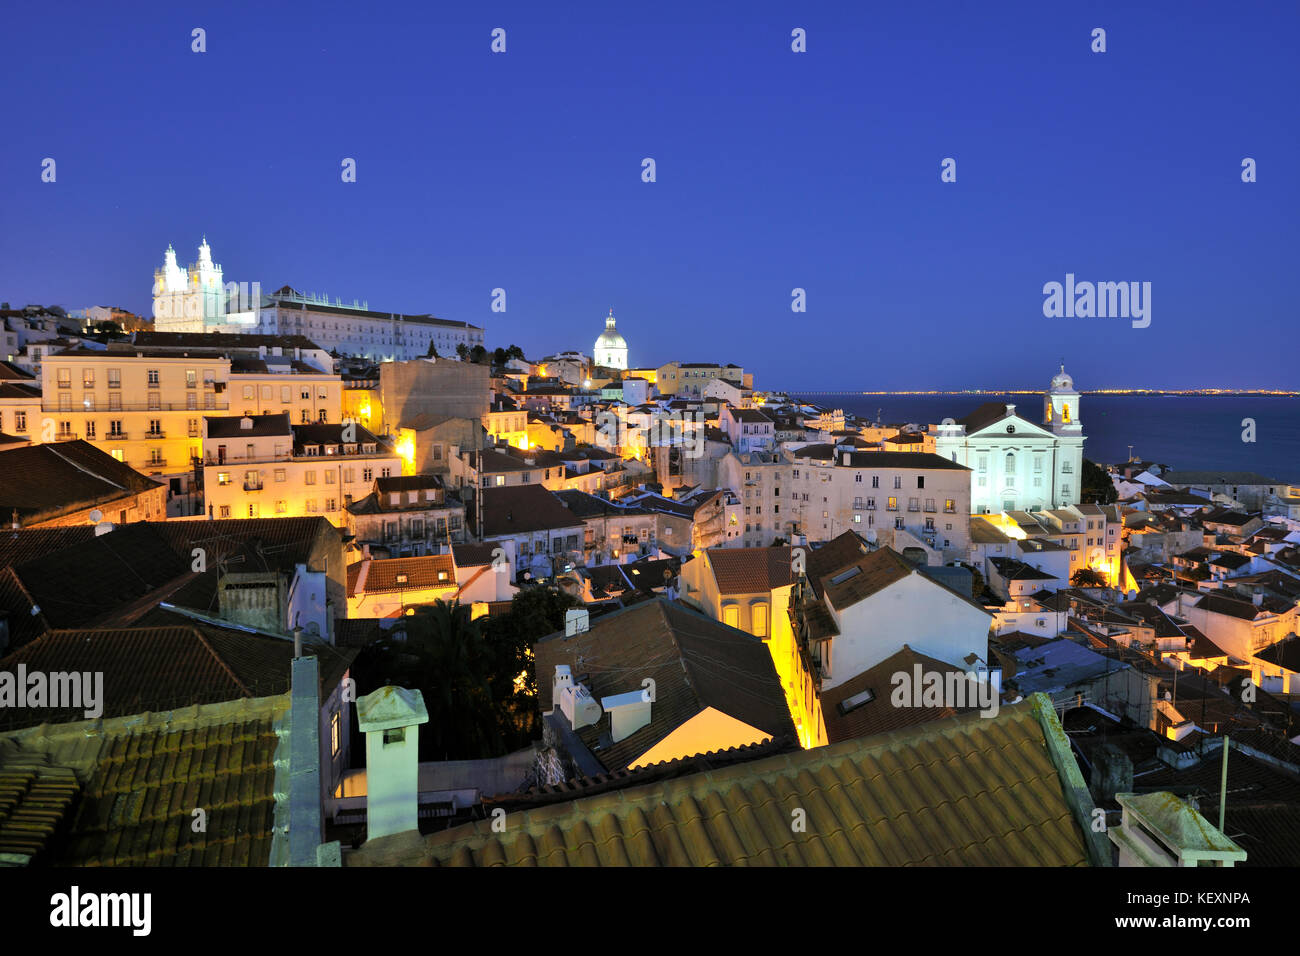 Alfama district and the Tagus river in the evening. Portas do Sol belvedere. Lisbon, Portugal Stock Photo